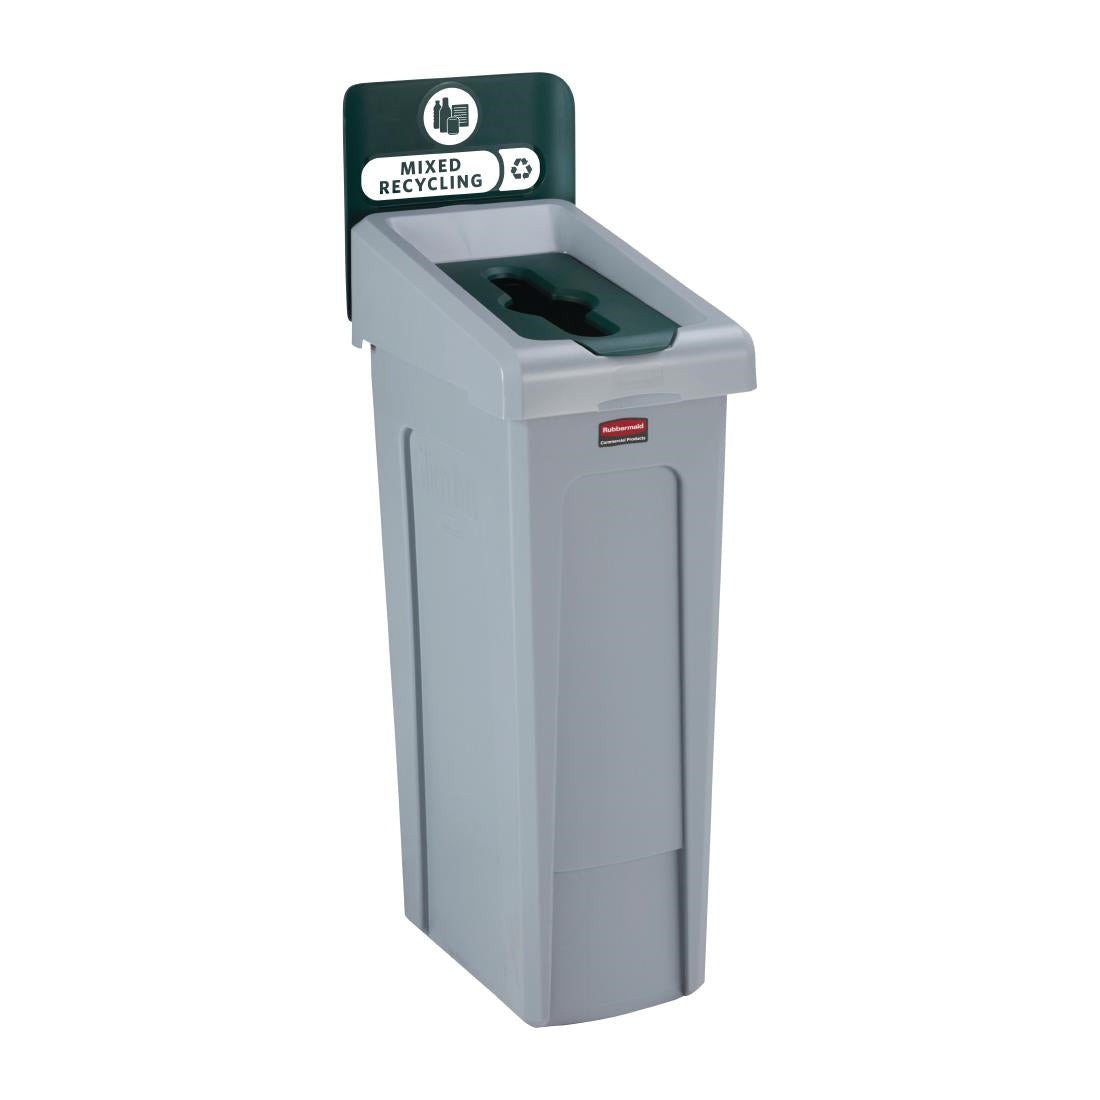 DY084 Rubbermaid Slim Jim Mixed Recycling Station Green 87Ltr